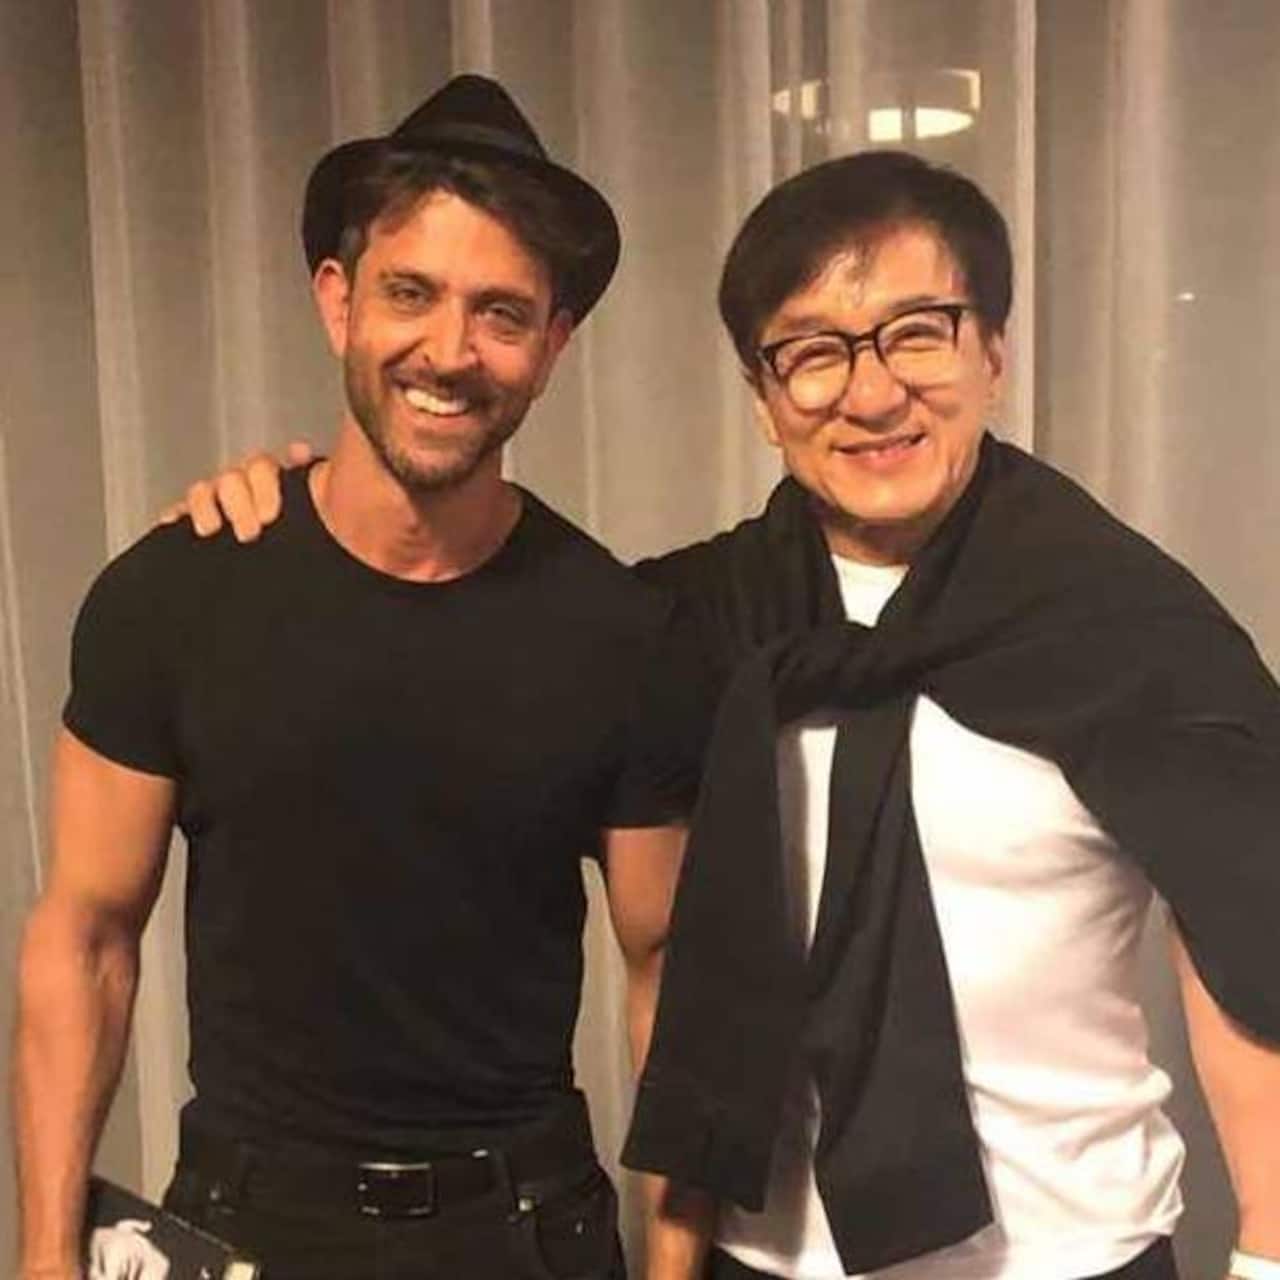 Hrithik Roshan fanboys over Jackie Chan and talks about Super 30 on his China